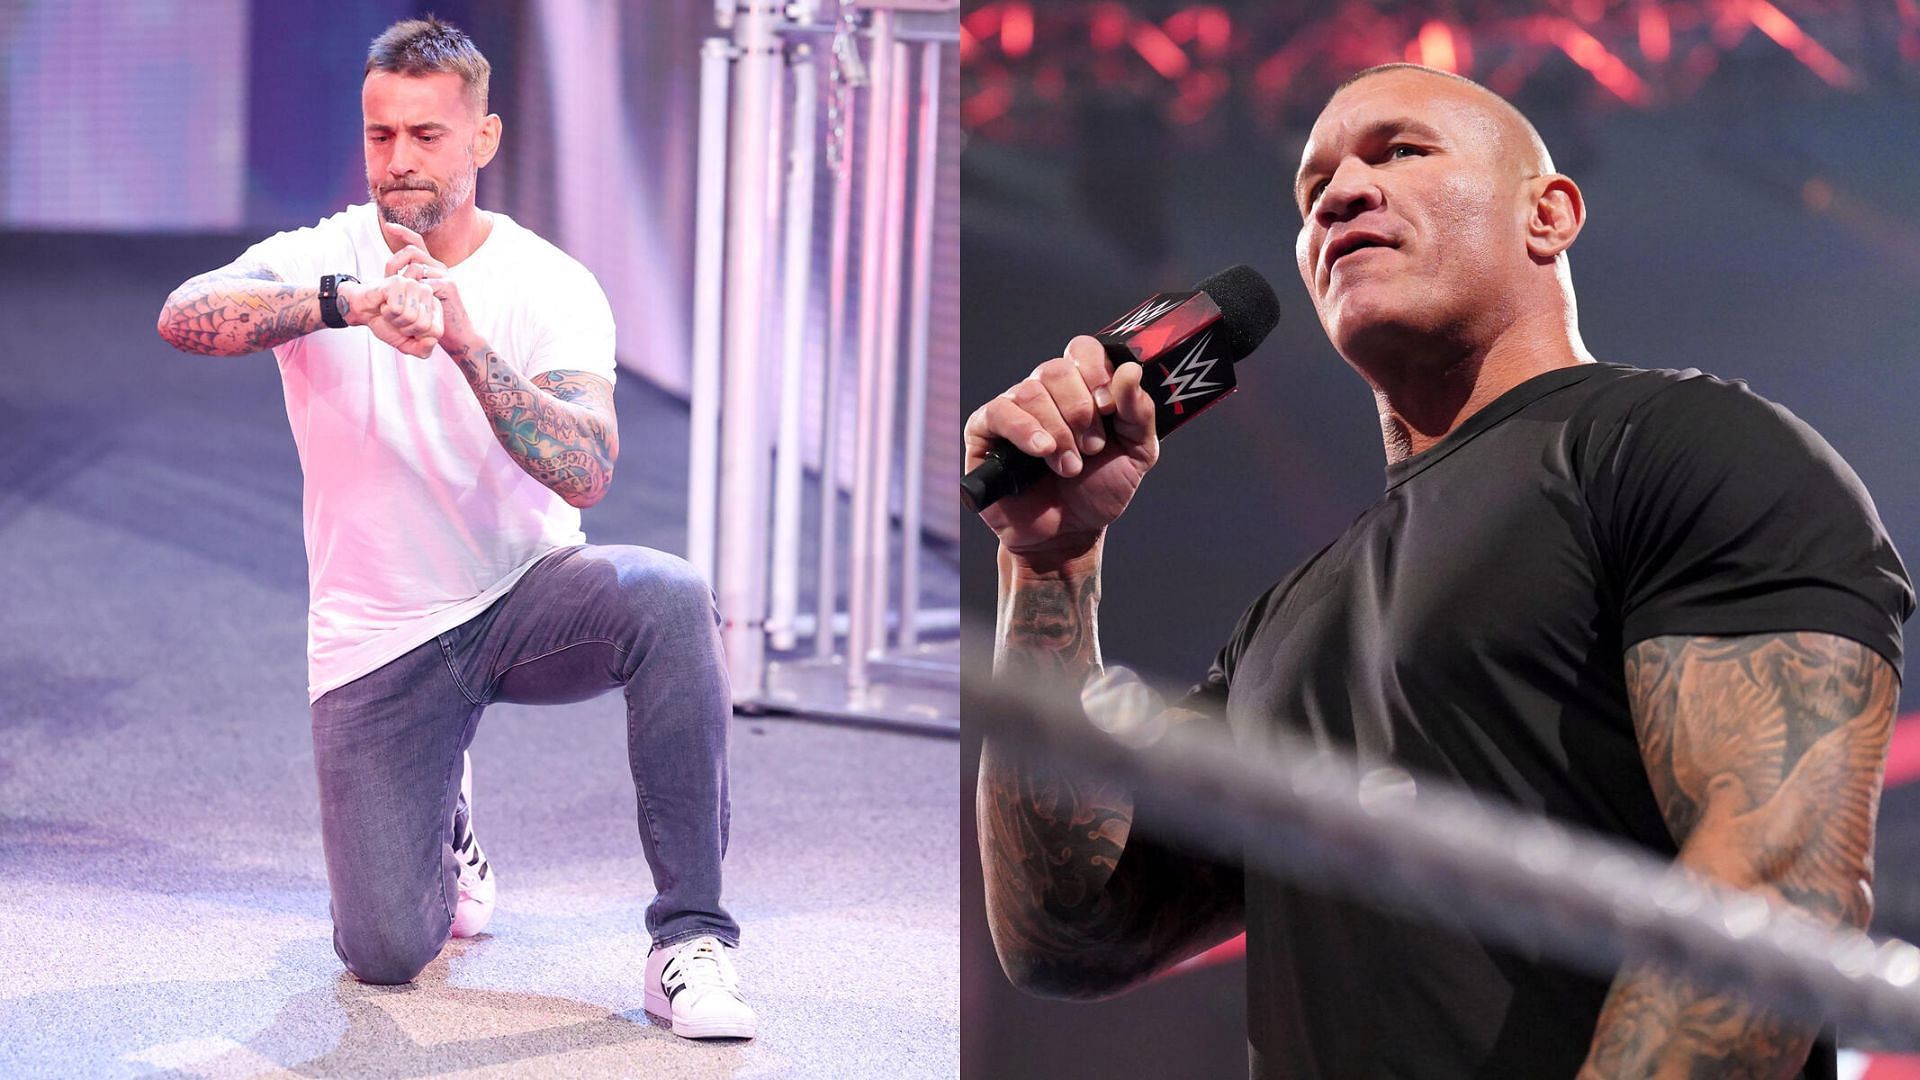 CM Punk and Randy Orton have feuded with each other on multiple occasions